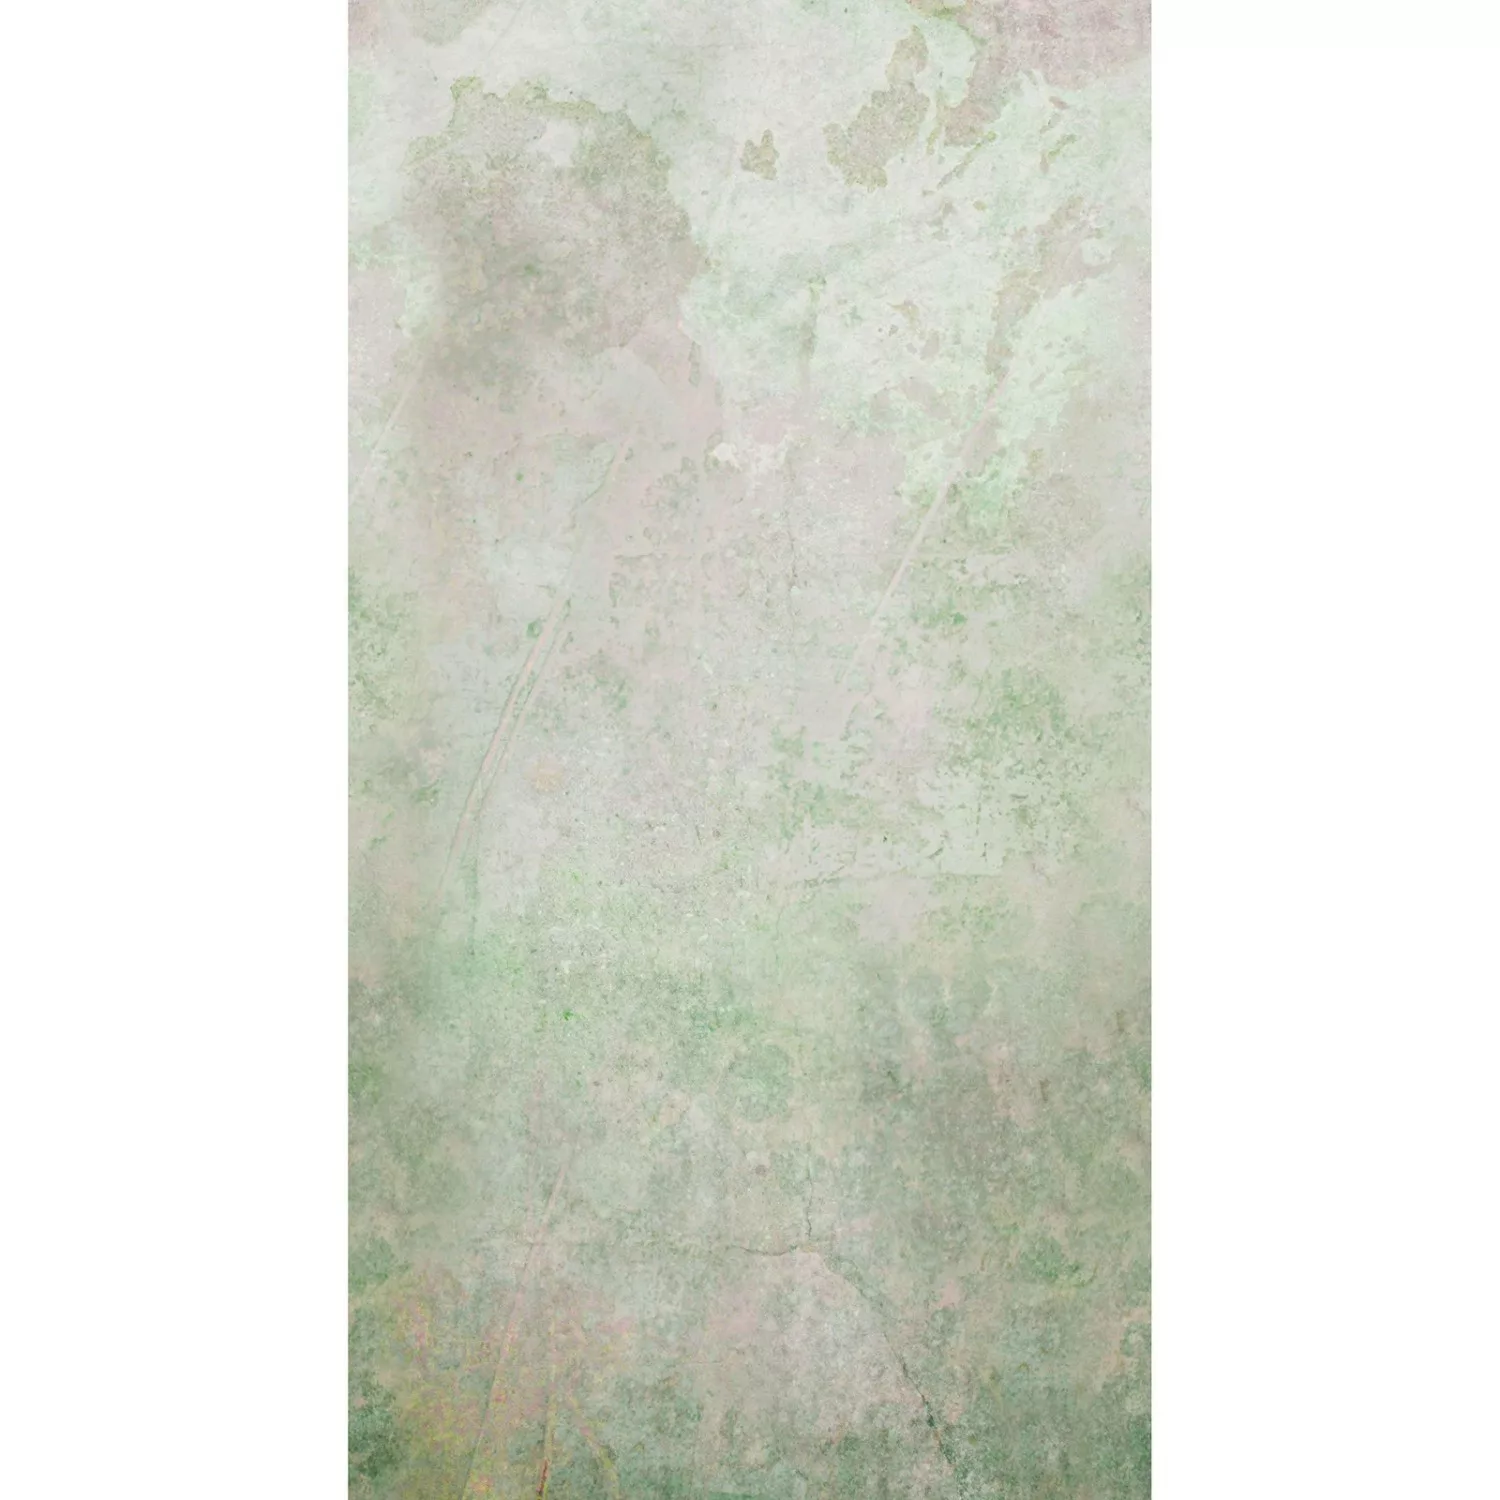 Art for the Home Fototapete Pure nature faded 280 x 150 cm günstig online kaufen